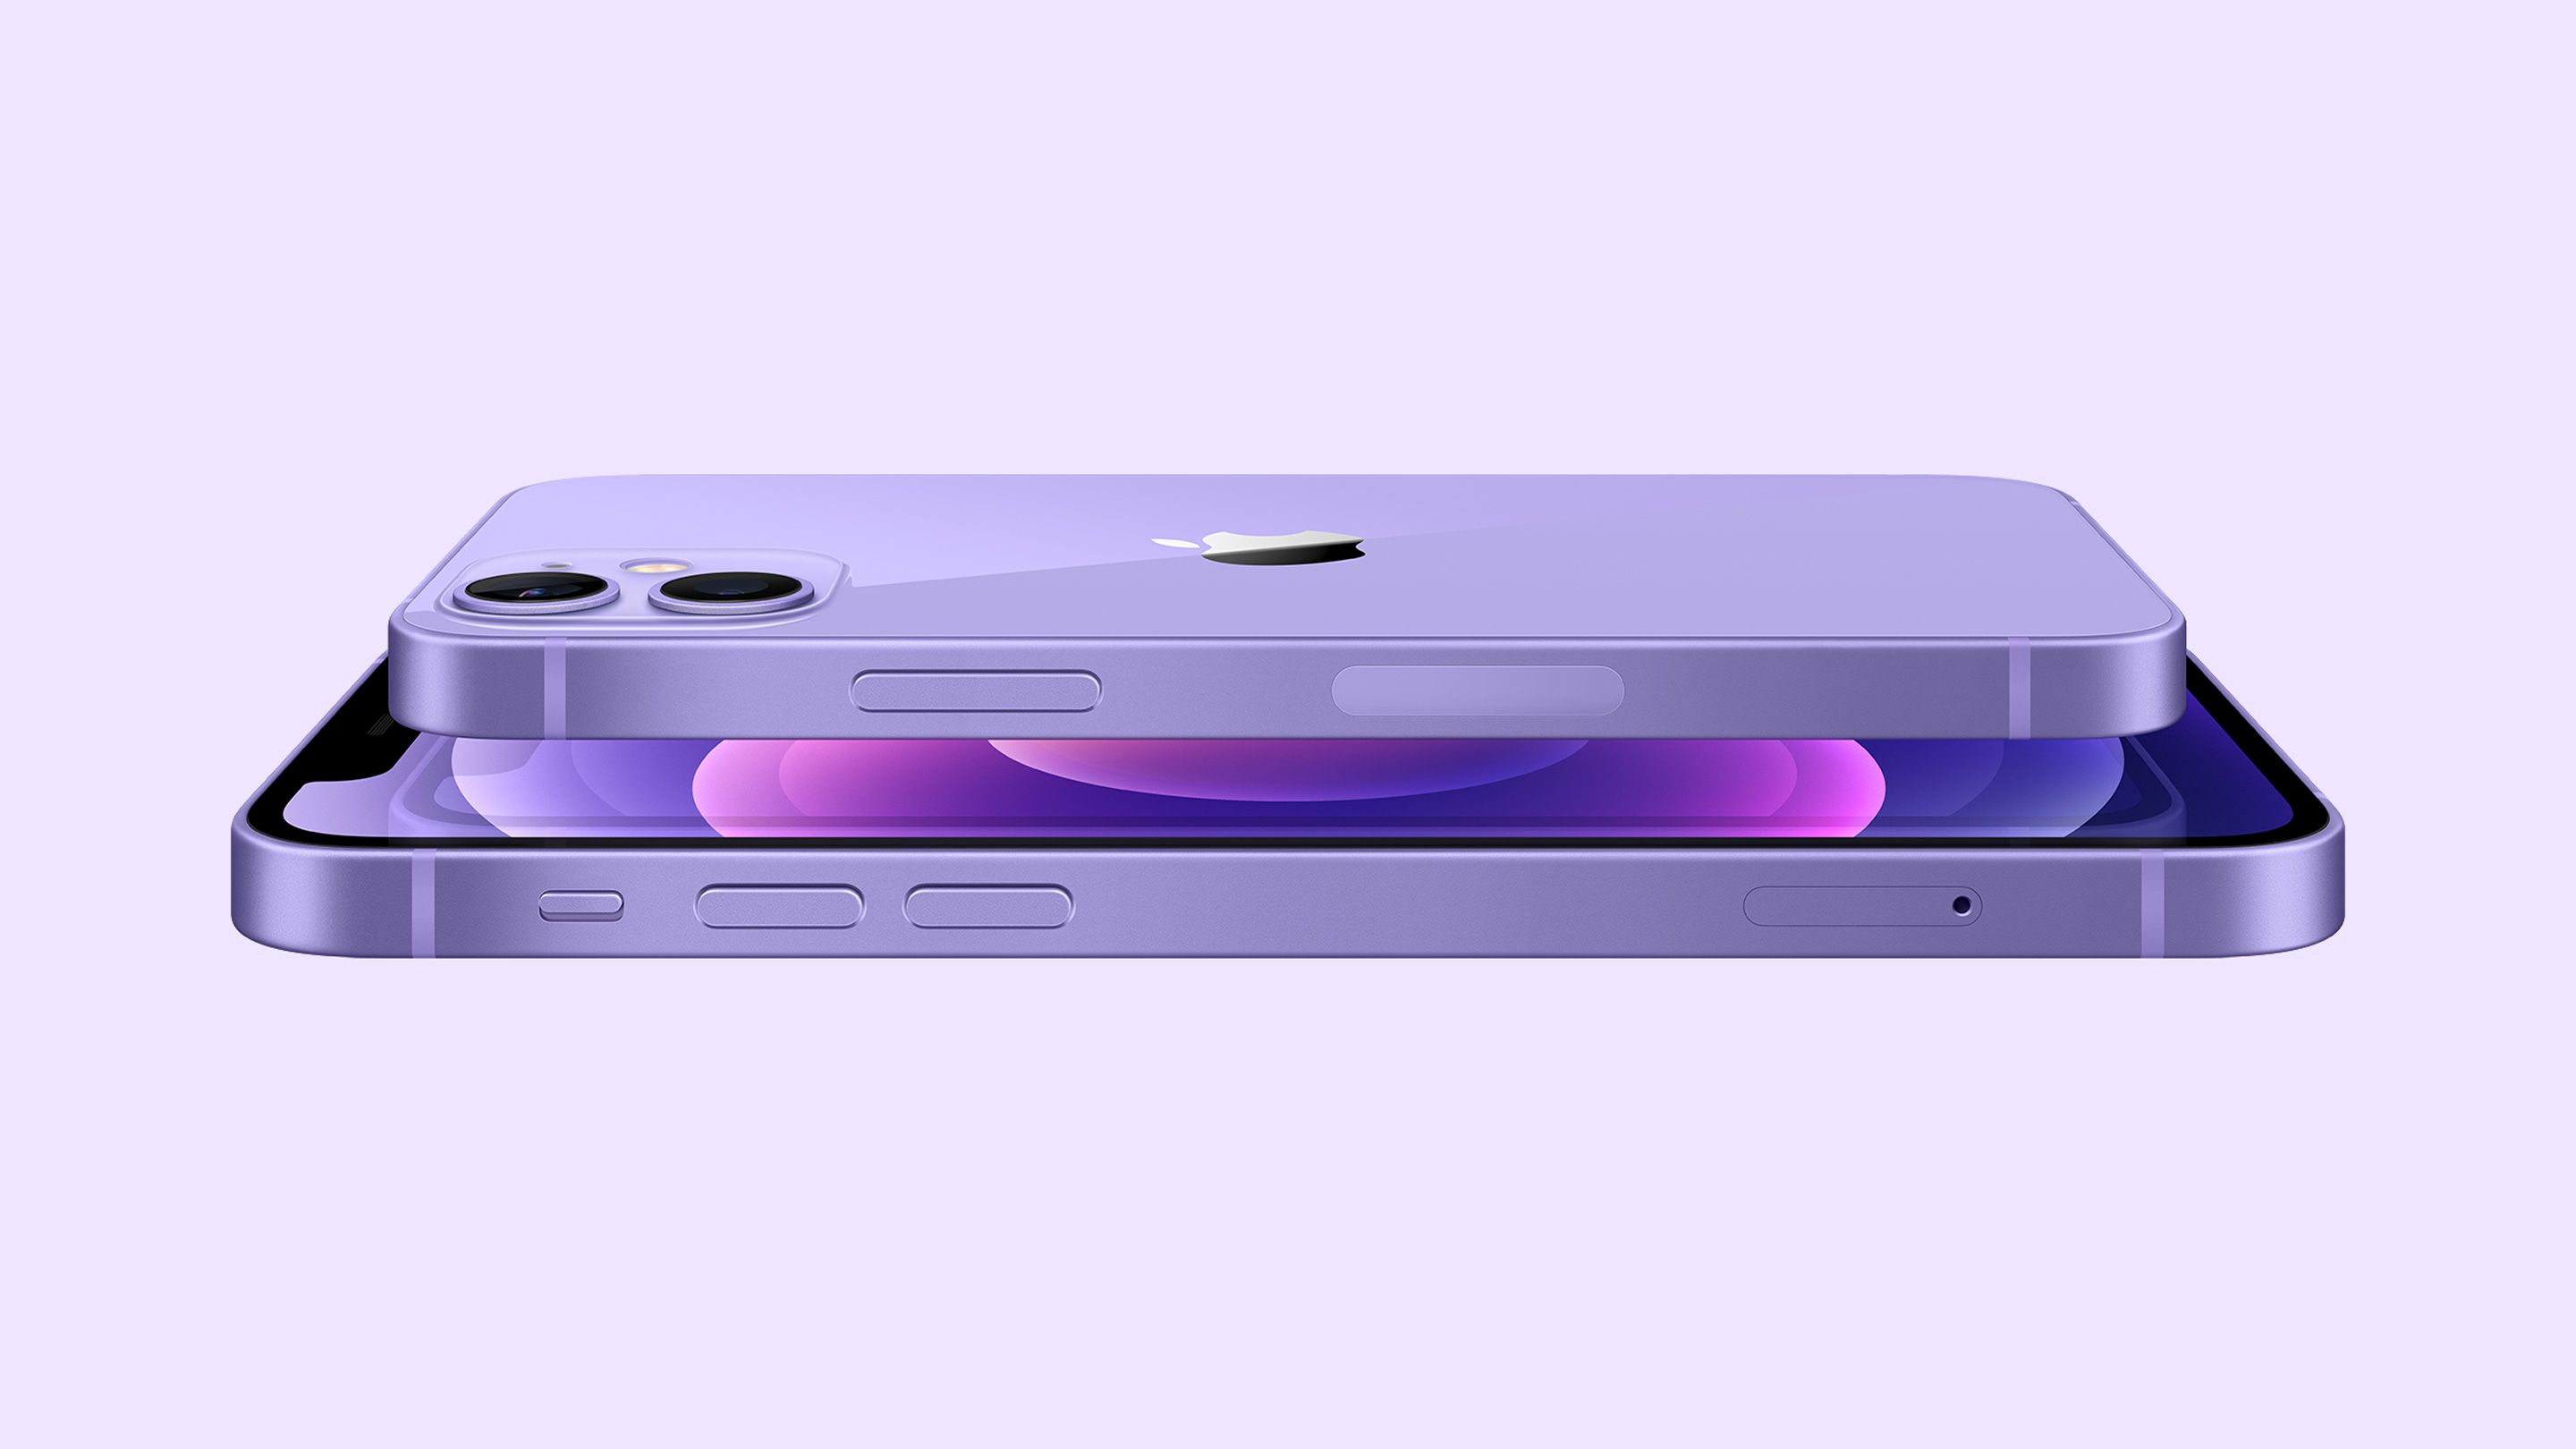 The iPhone 12 and 12 Mini in purple side-by-side